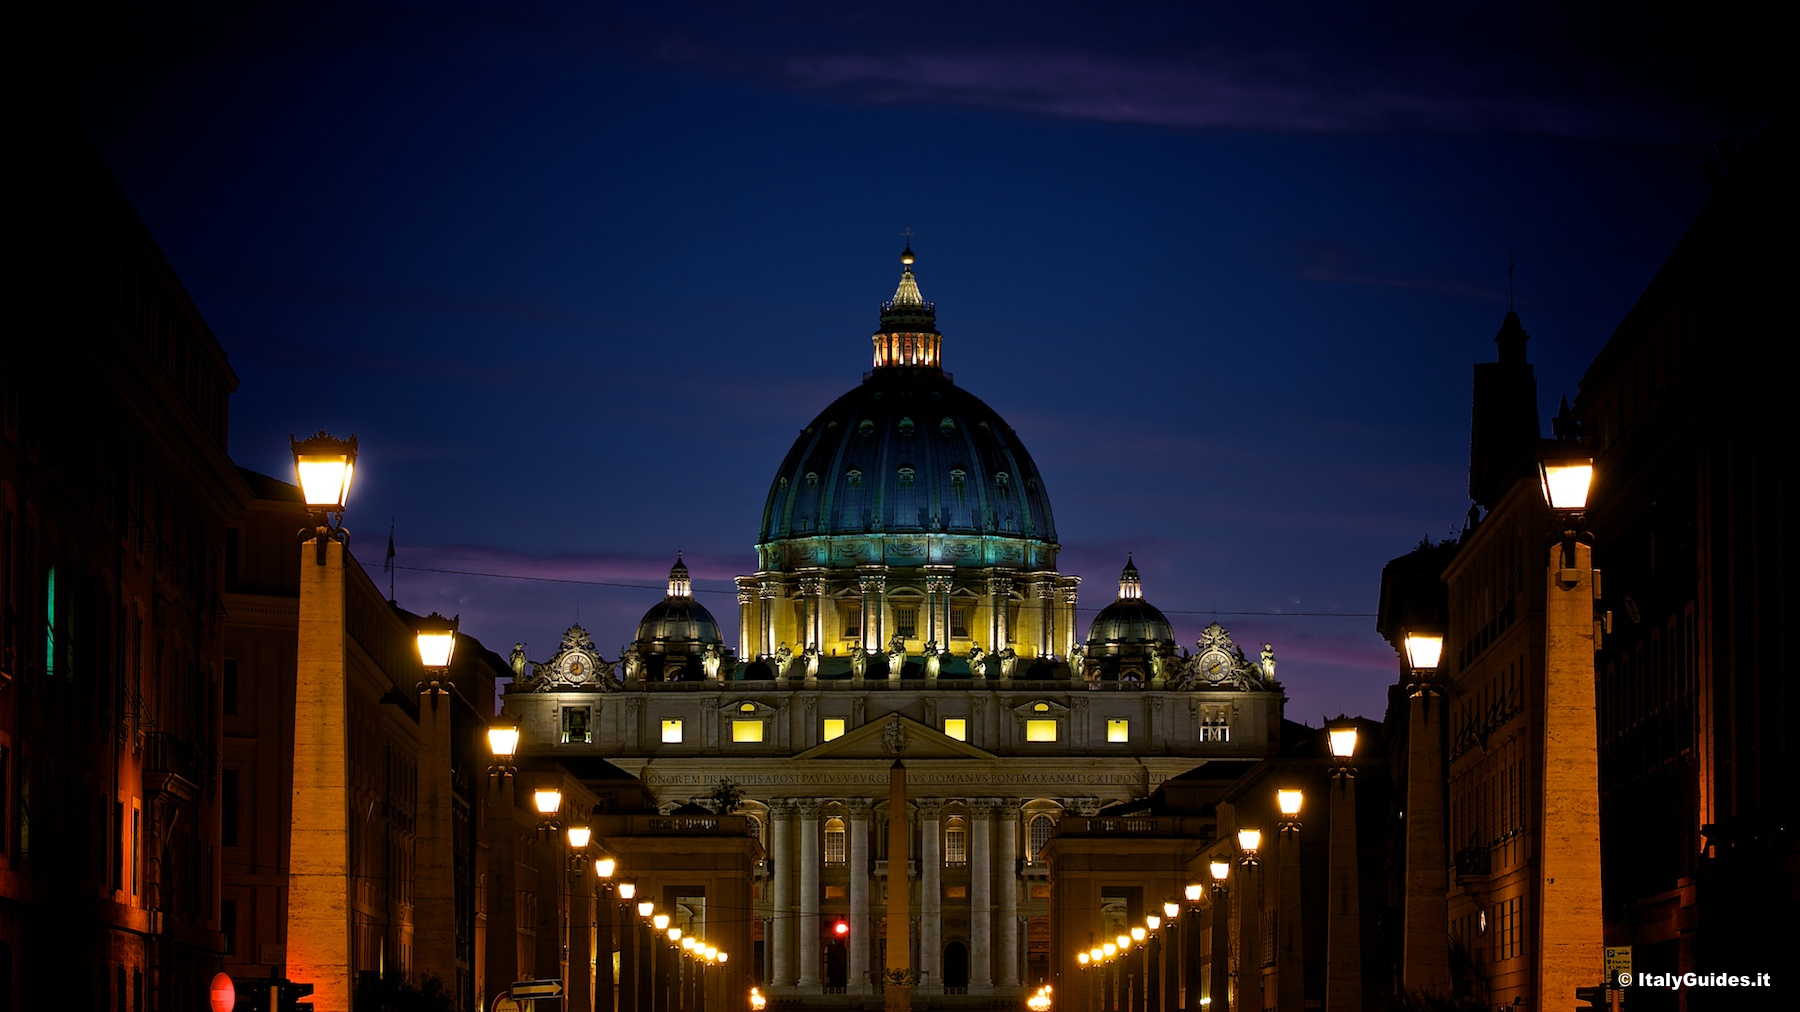 Picture of St. Peter's Basilica, Rome